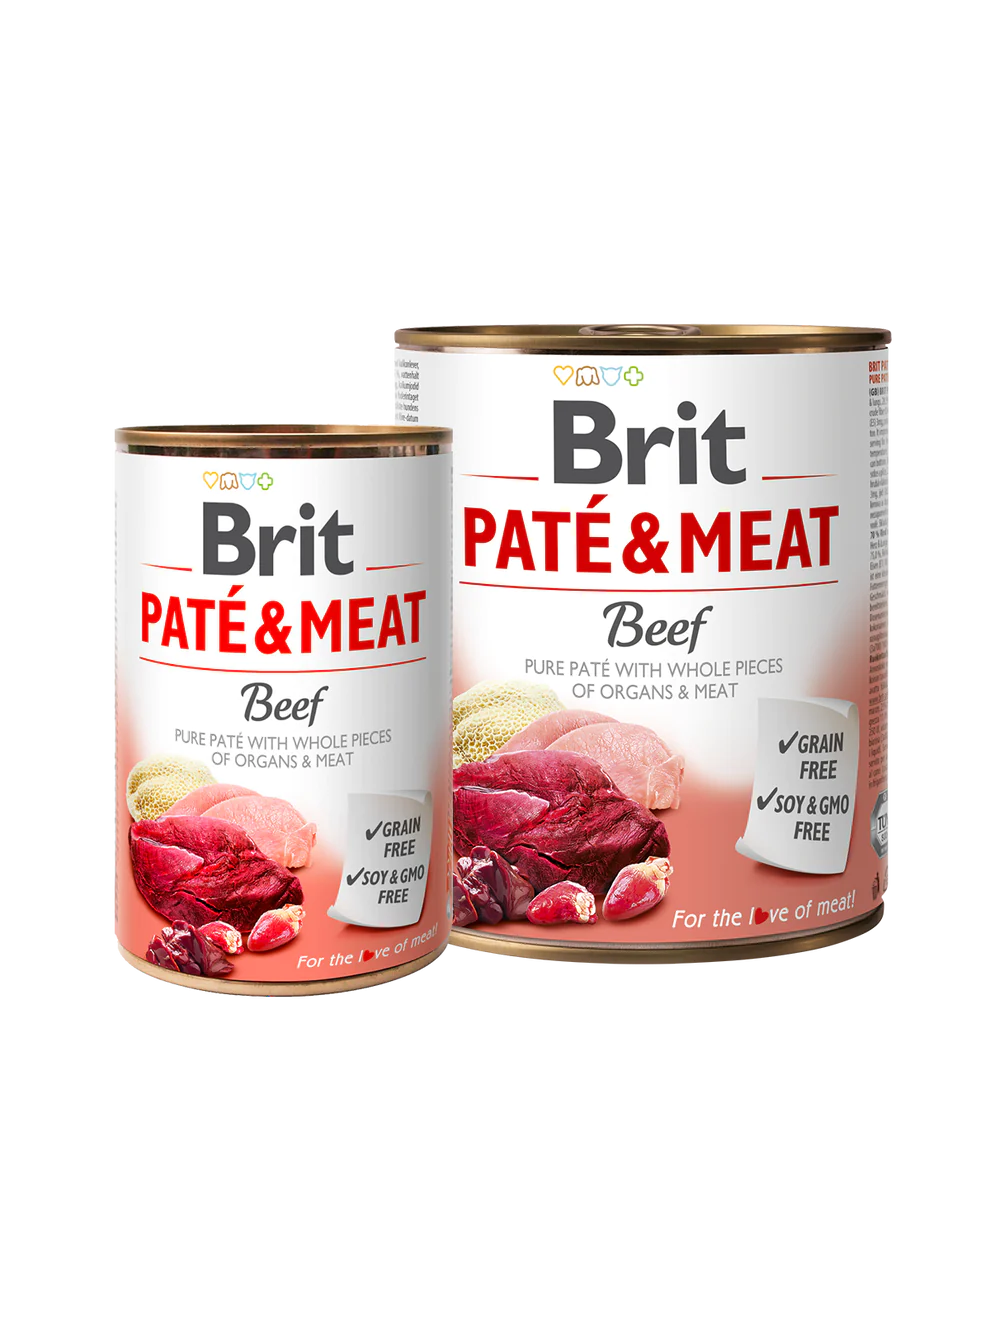 BRIT PATÉ & MEAT BEEF 6 pack of 400g